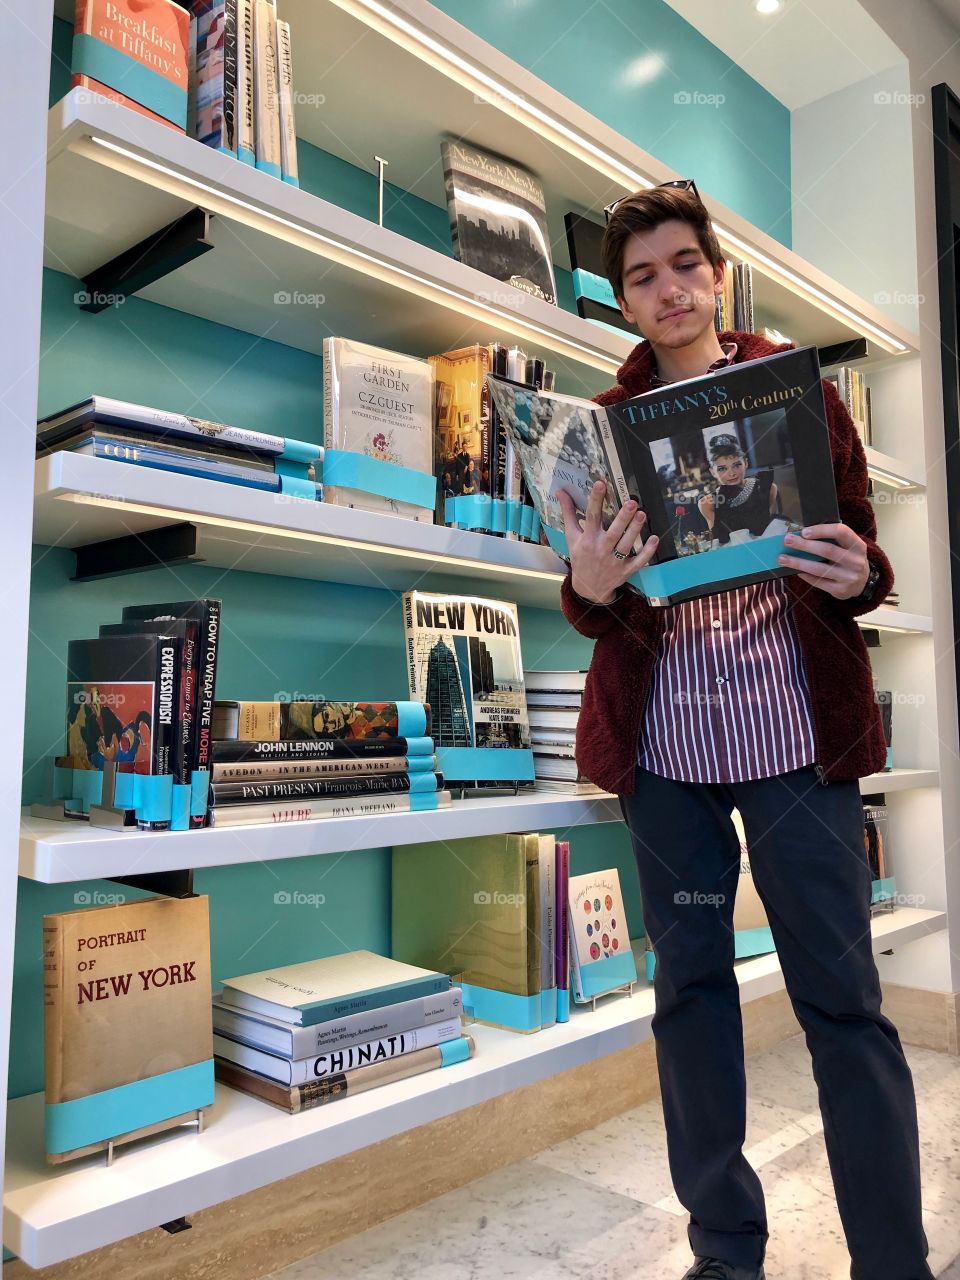 Reading books at Tiffany and co.